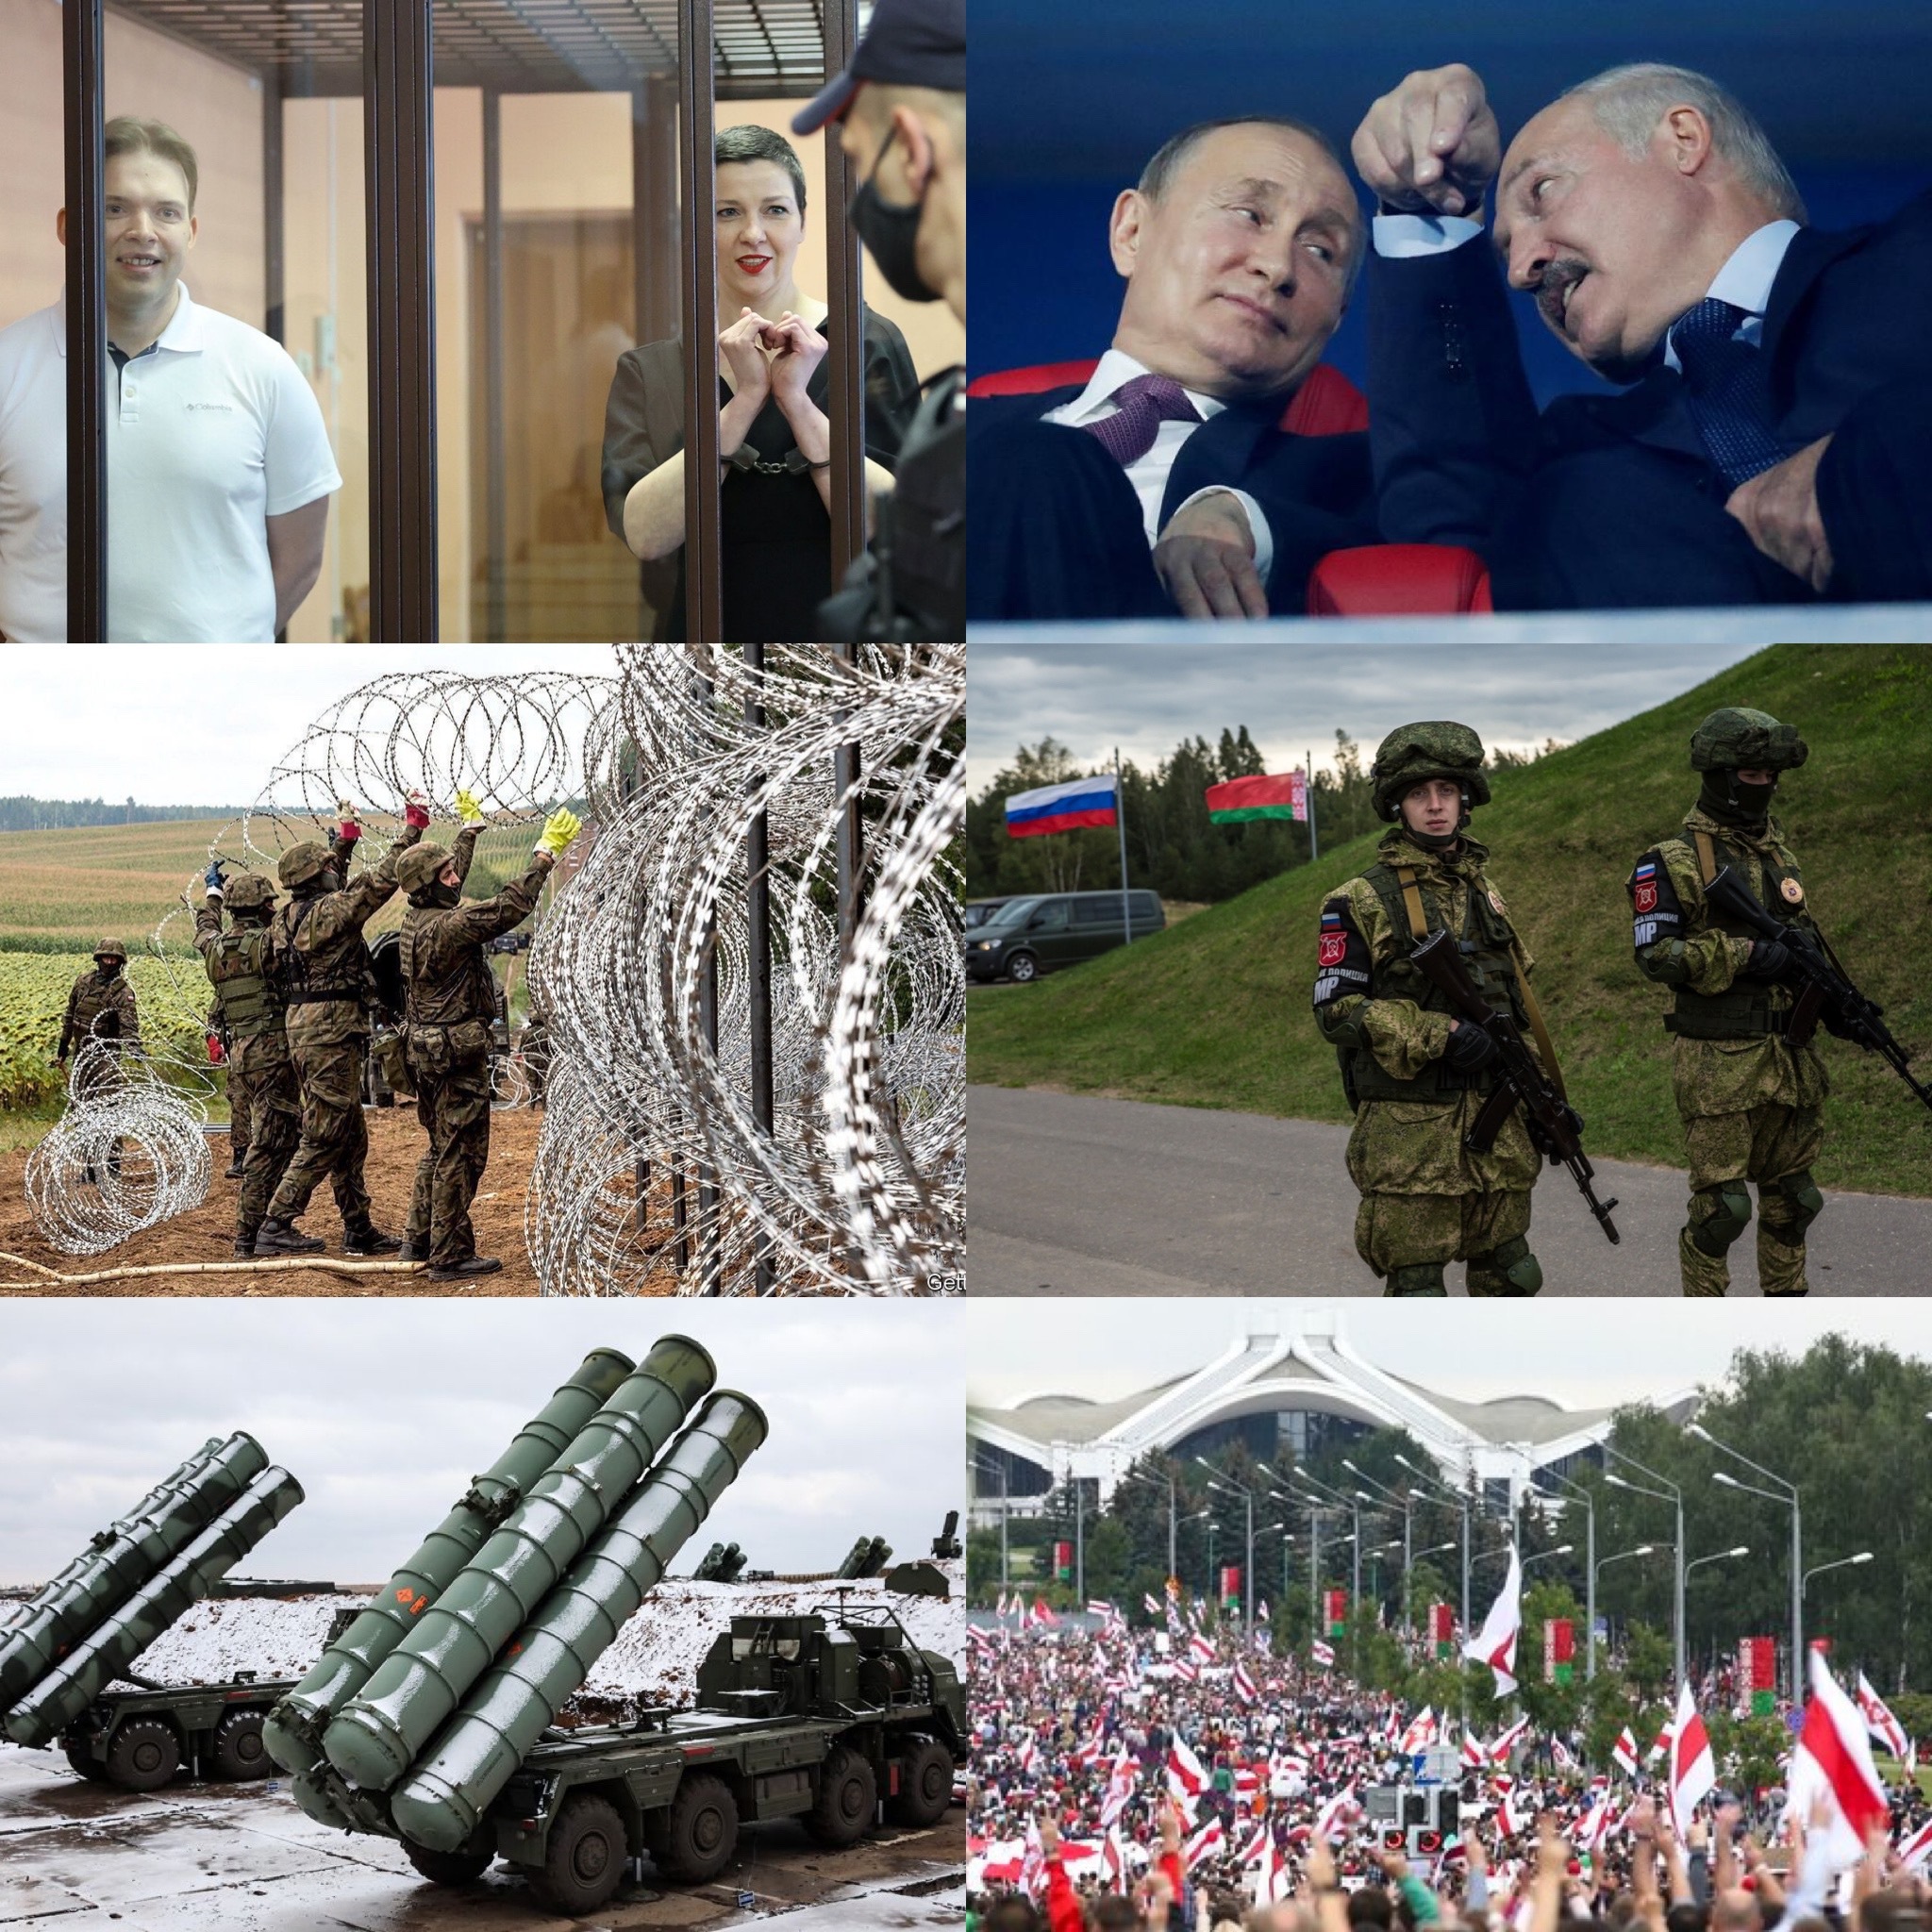 This past week: Political dissident purge in Belarus, new Union State and military agreements between Lukashenka and Putin, border crisis with Eastern Europe &amp; more.